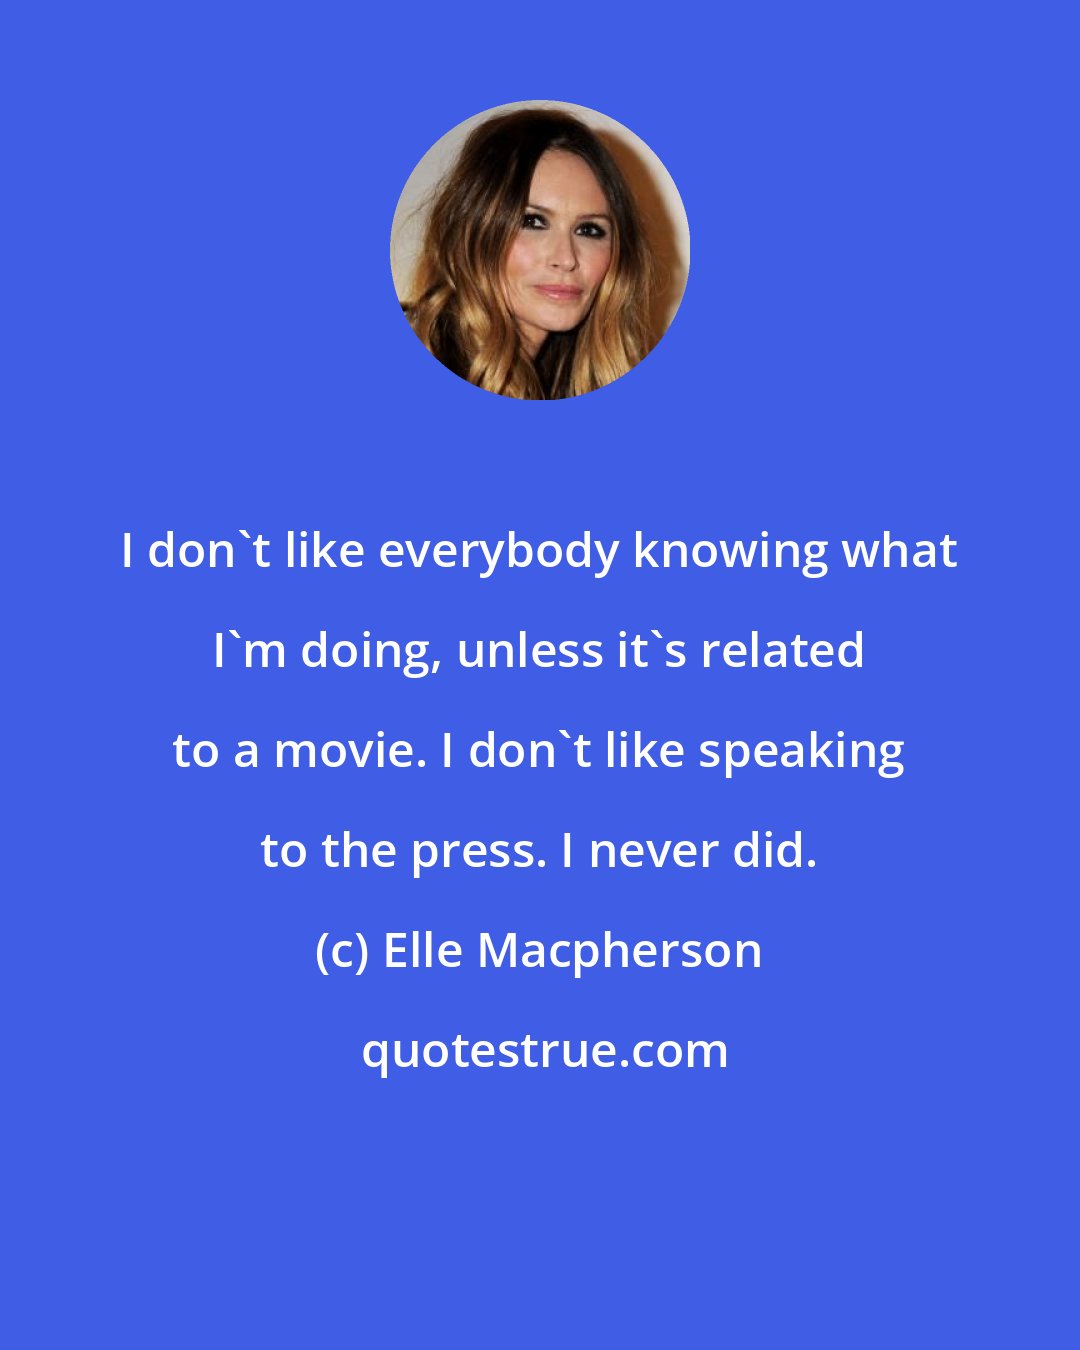 Elle Macpherson: I don't like everybody knowing what I'm doing, unless it's related to a movie. I don't like speaking to the press. I never did.